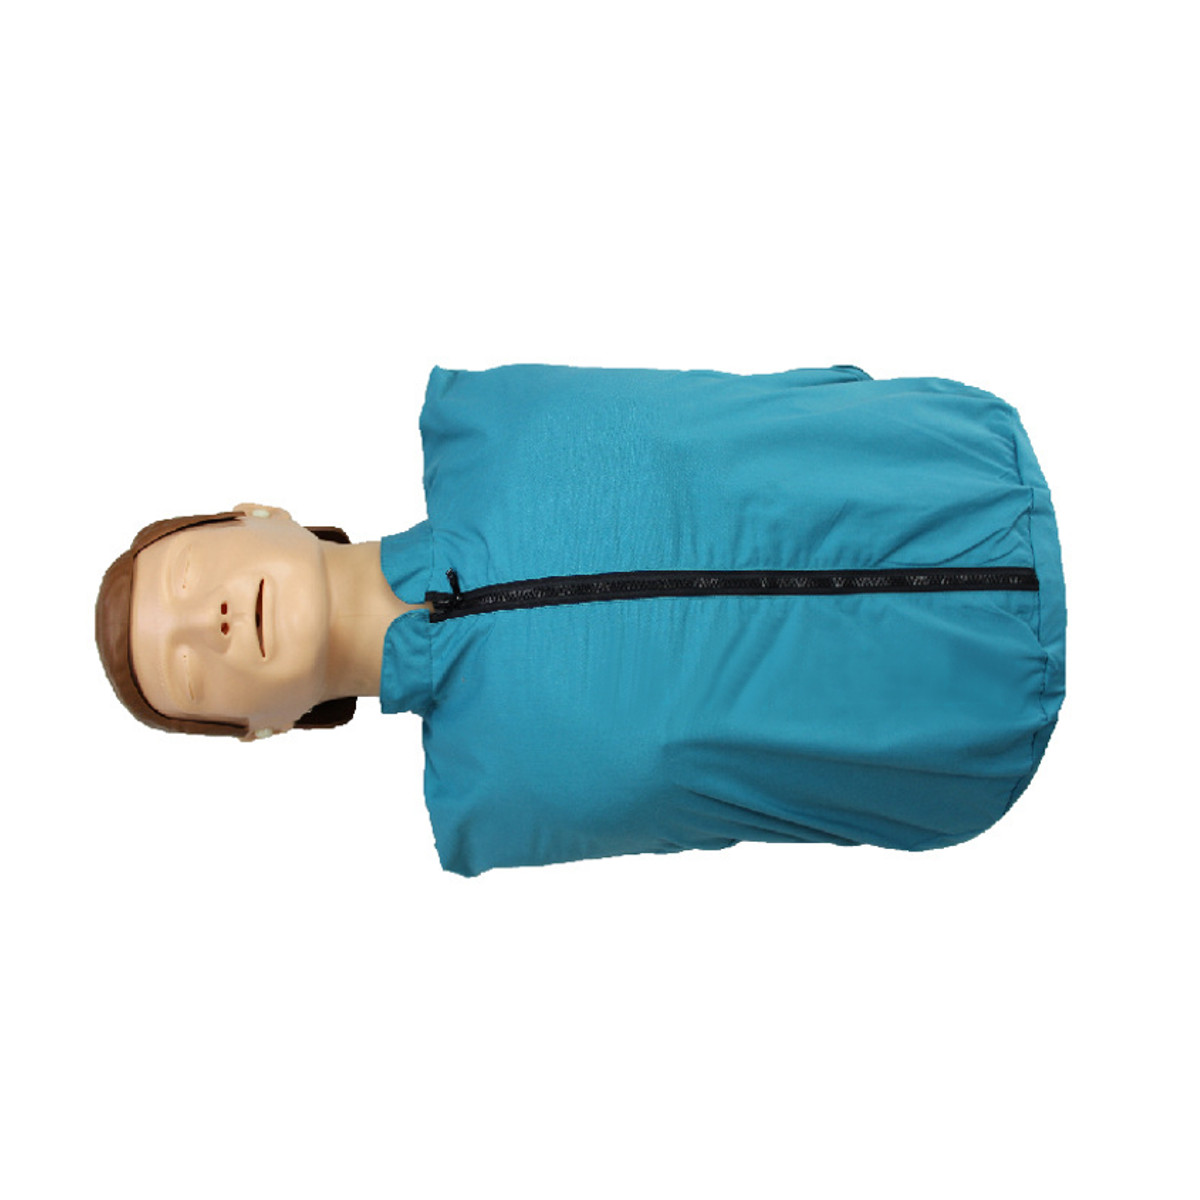 CPR Adult Manikin AED First Aid Training Dummy Training Medical Model Respiration Human 10